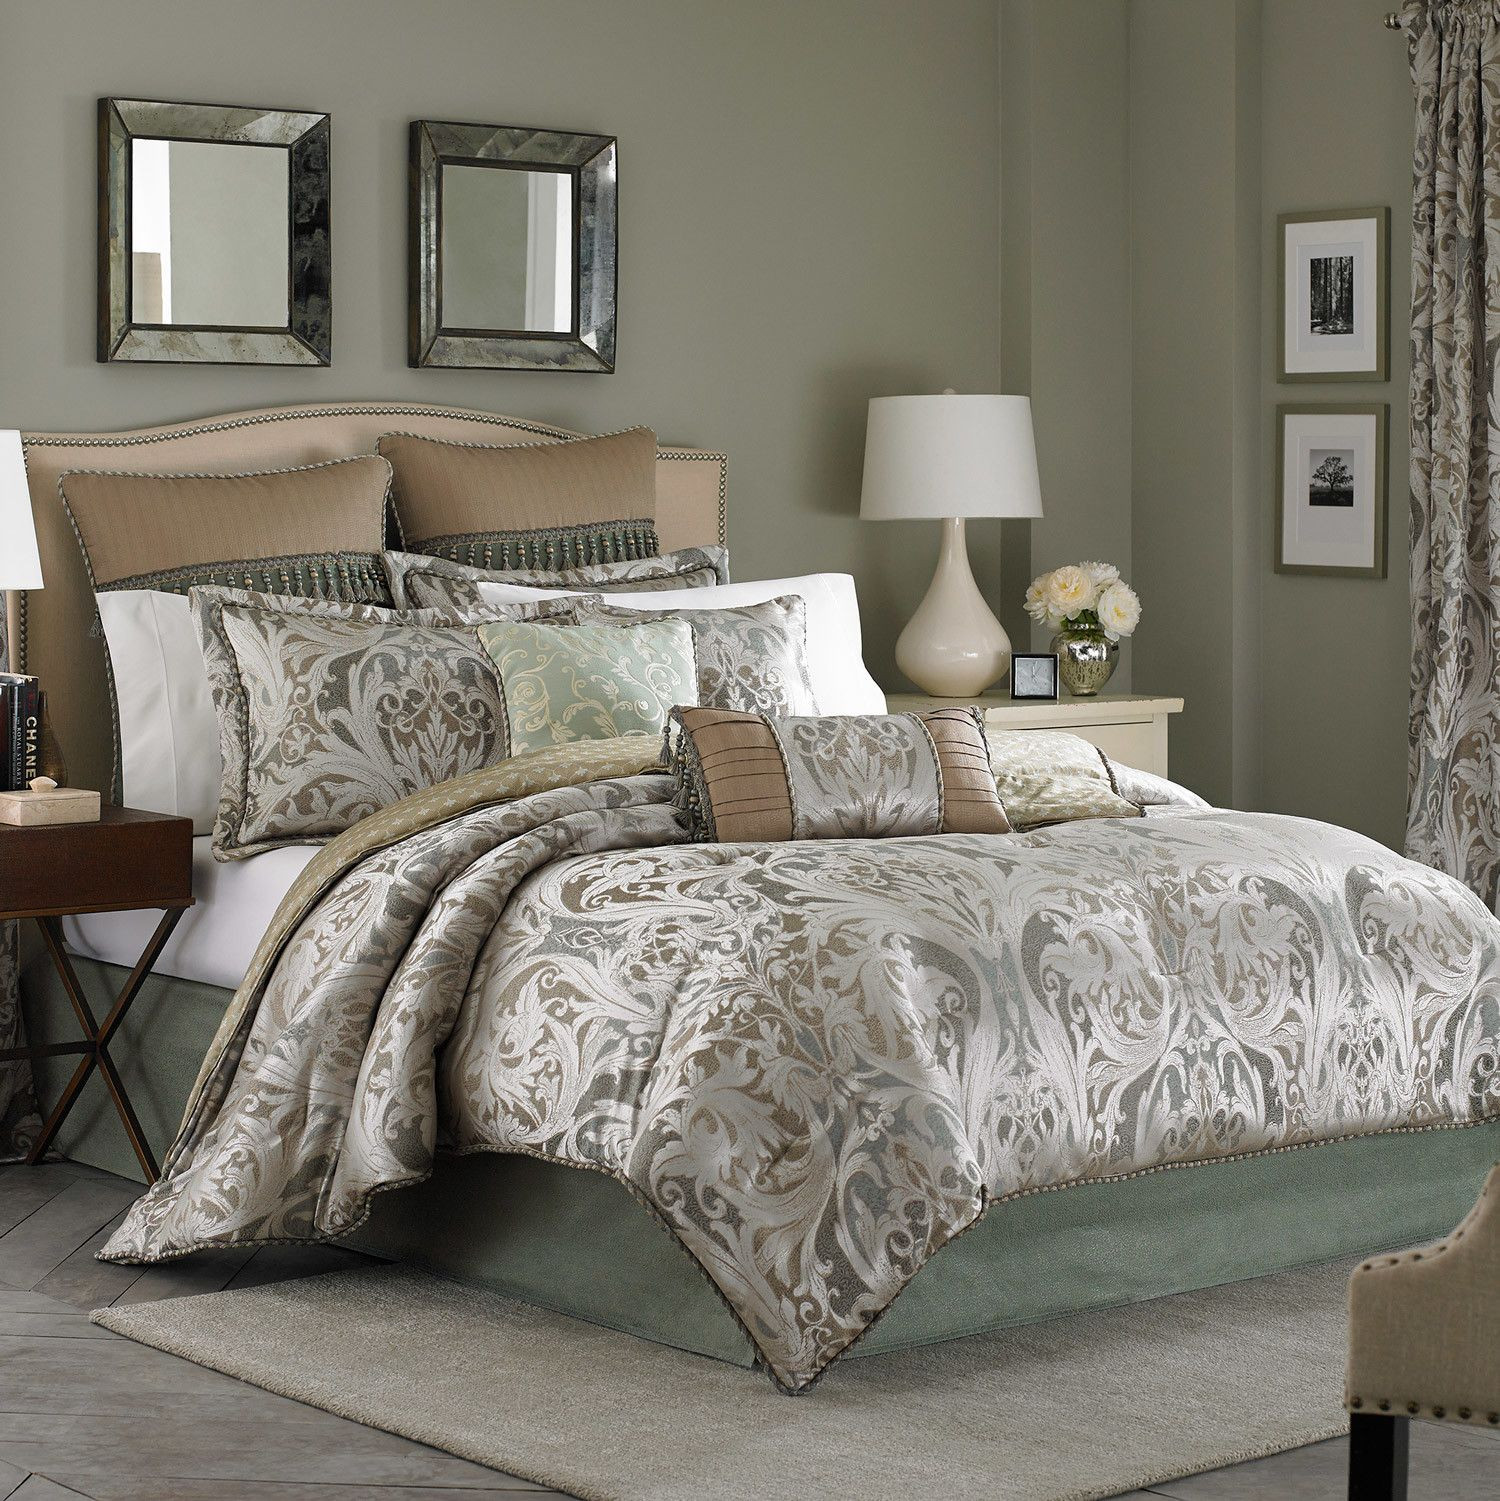 Elegant Bedspreads Master Bedroom
 Go for an elegant traditional look with a subtly metallic